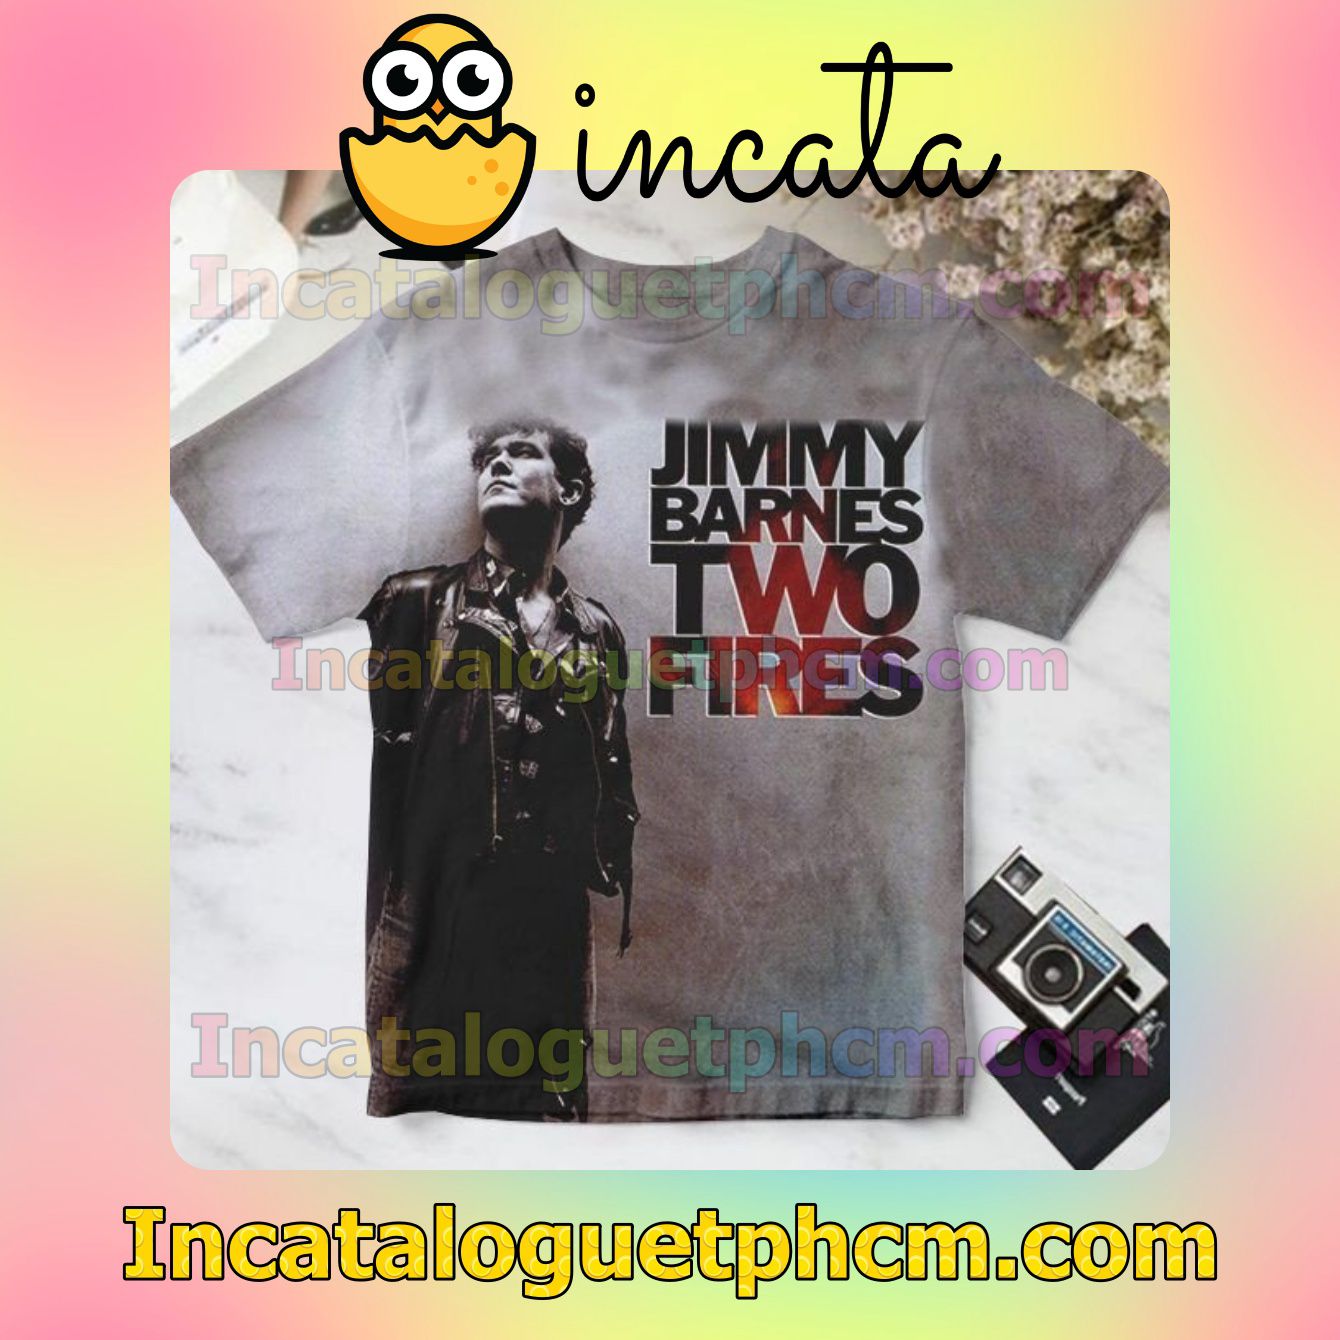 Jimmy Barnes Two Fires Album Cover For Fan Shirt